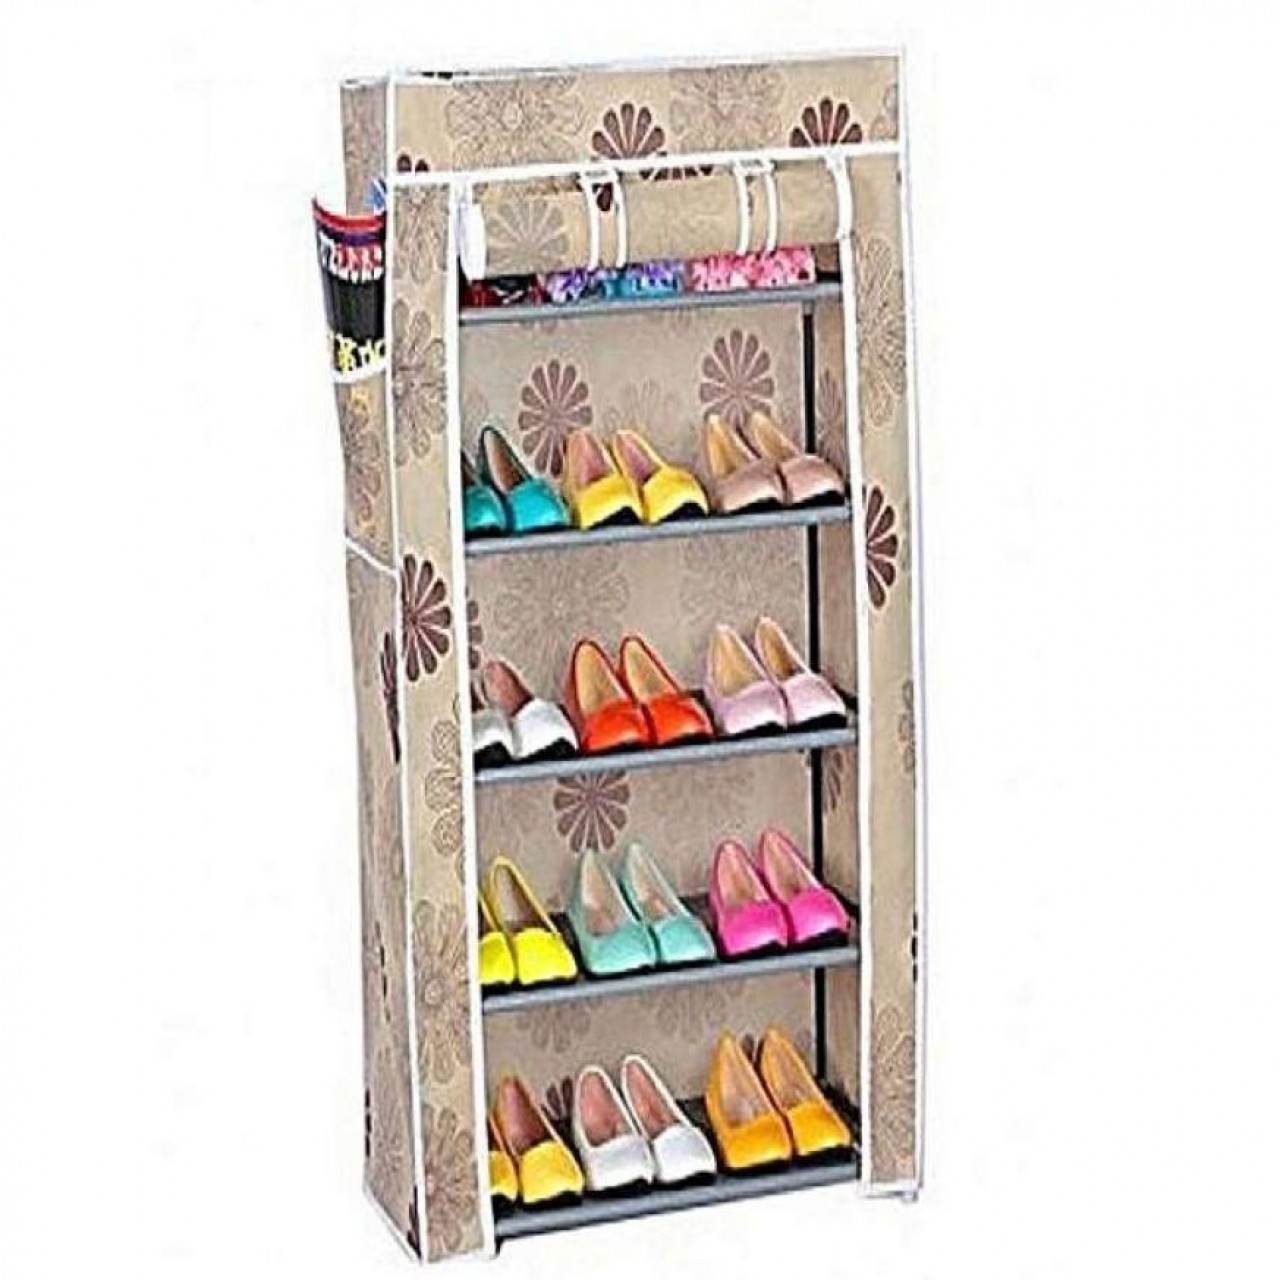 5 Layers Shoe Rack And Wardrobe Rack - Multi color